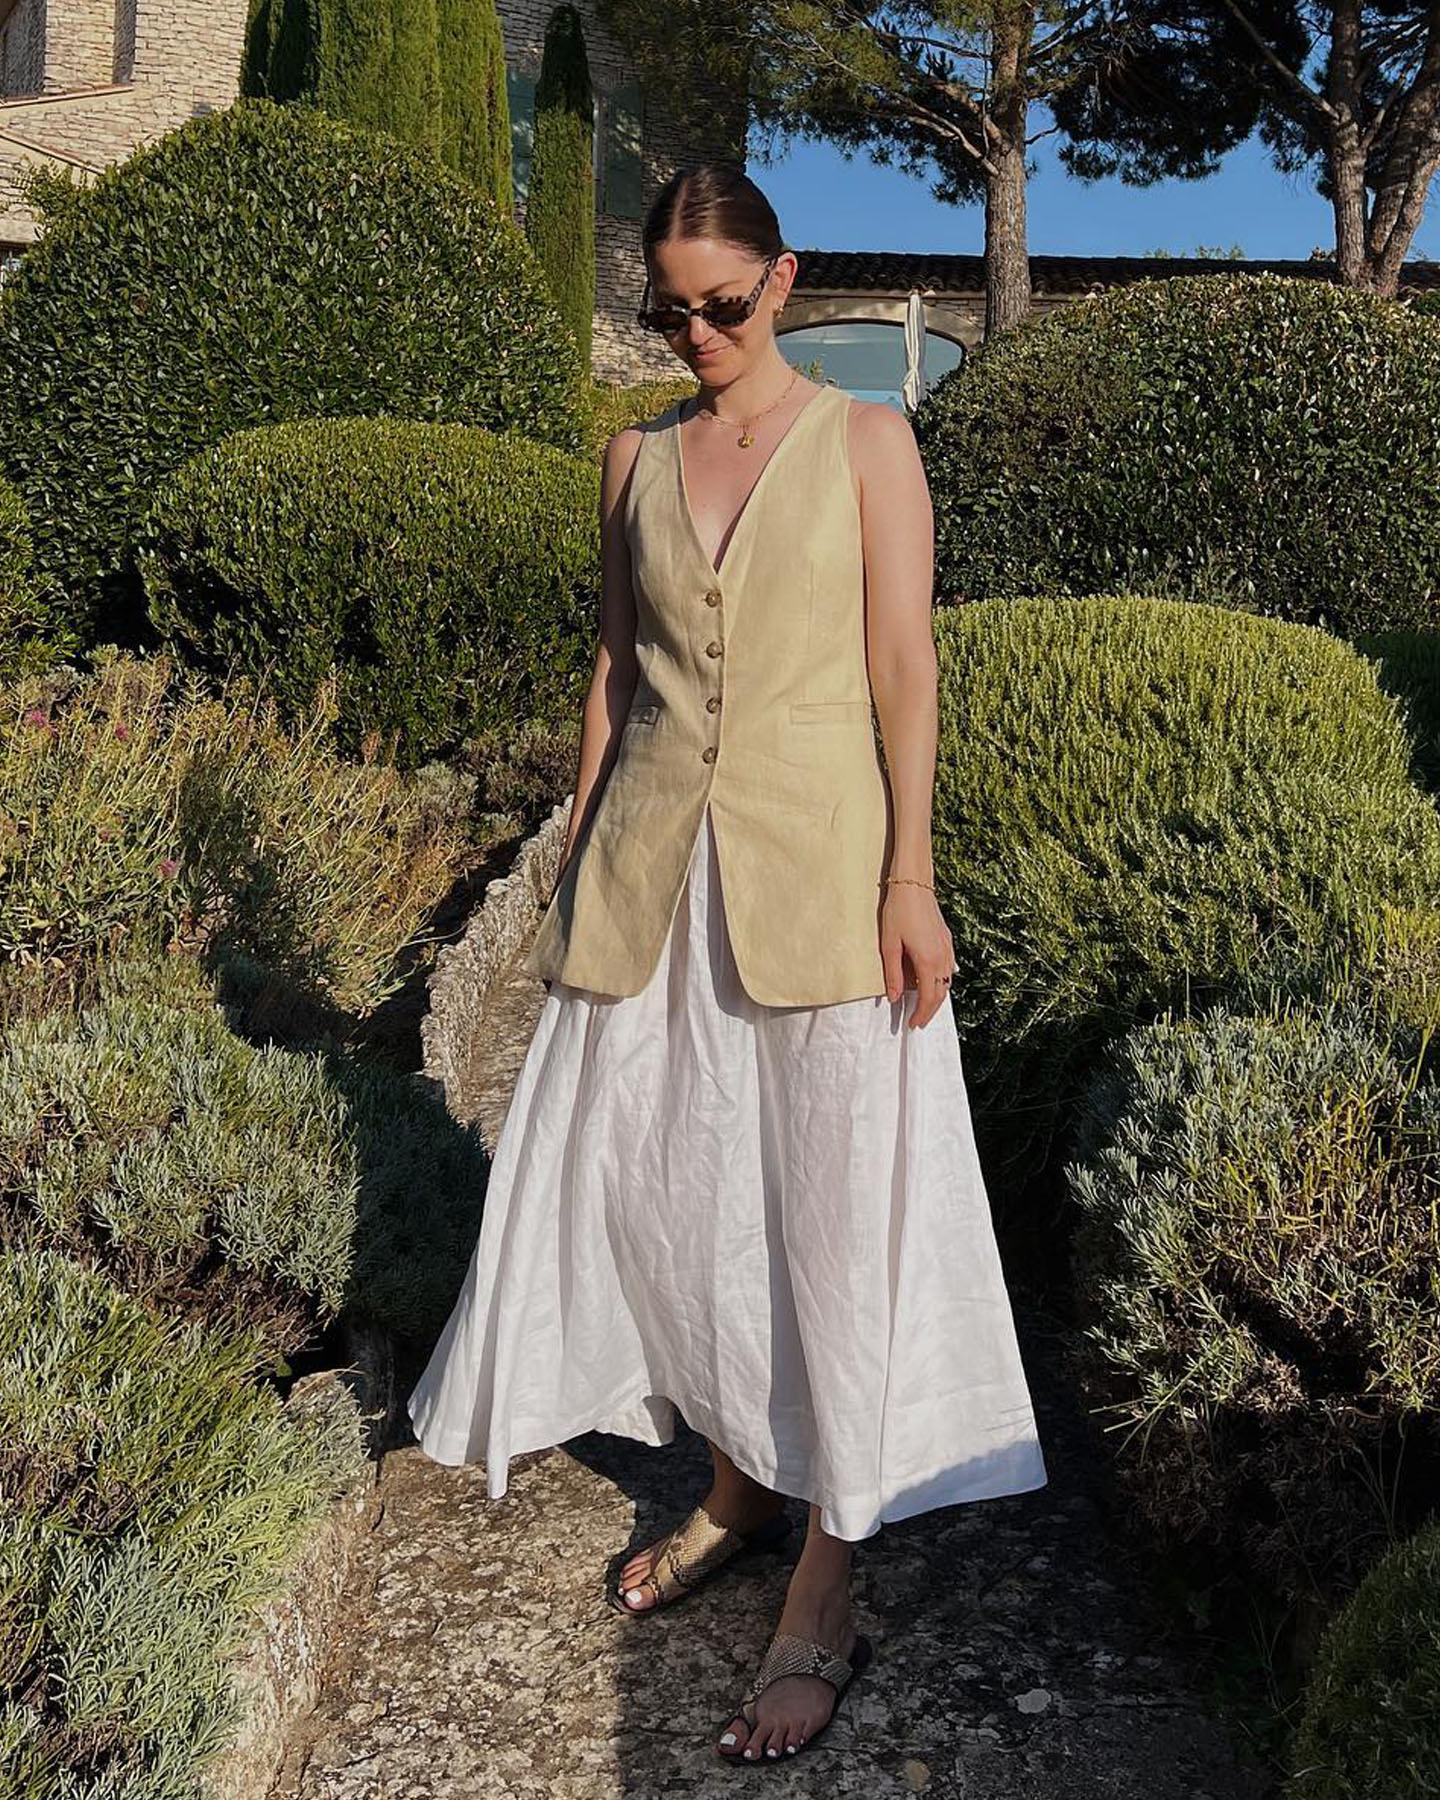 Influencer Marissa Cox poses in a garden in Southern France wearing oval sunglasses, a neutral vest top, white linen skirt, and snakeskin flat sandals.